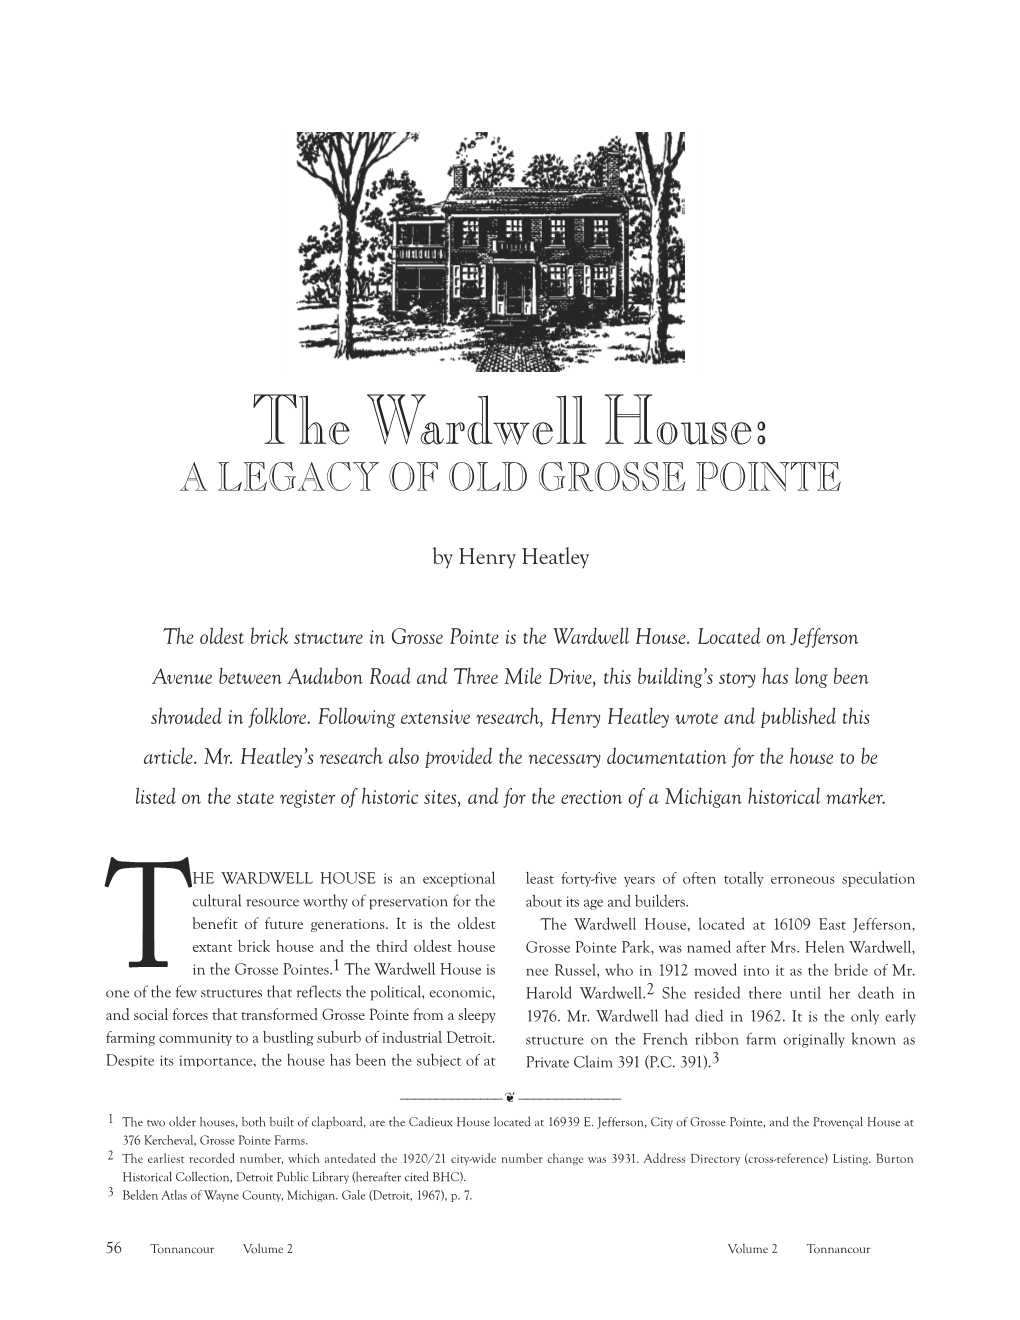 The Wardwell House: a LEGACY of OLD GROSSE POINTE